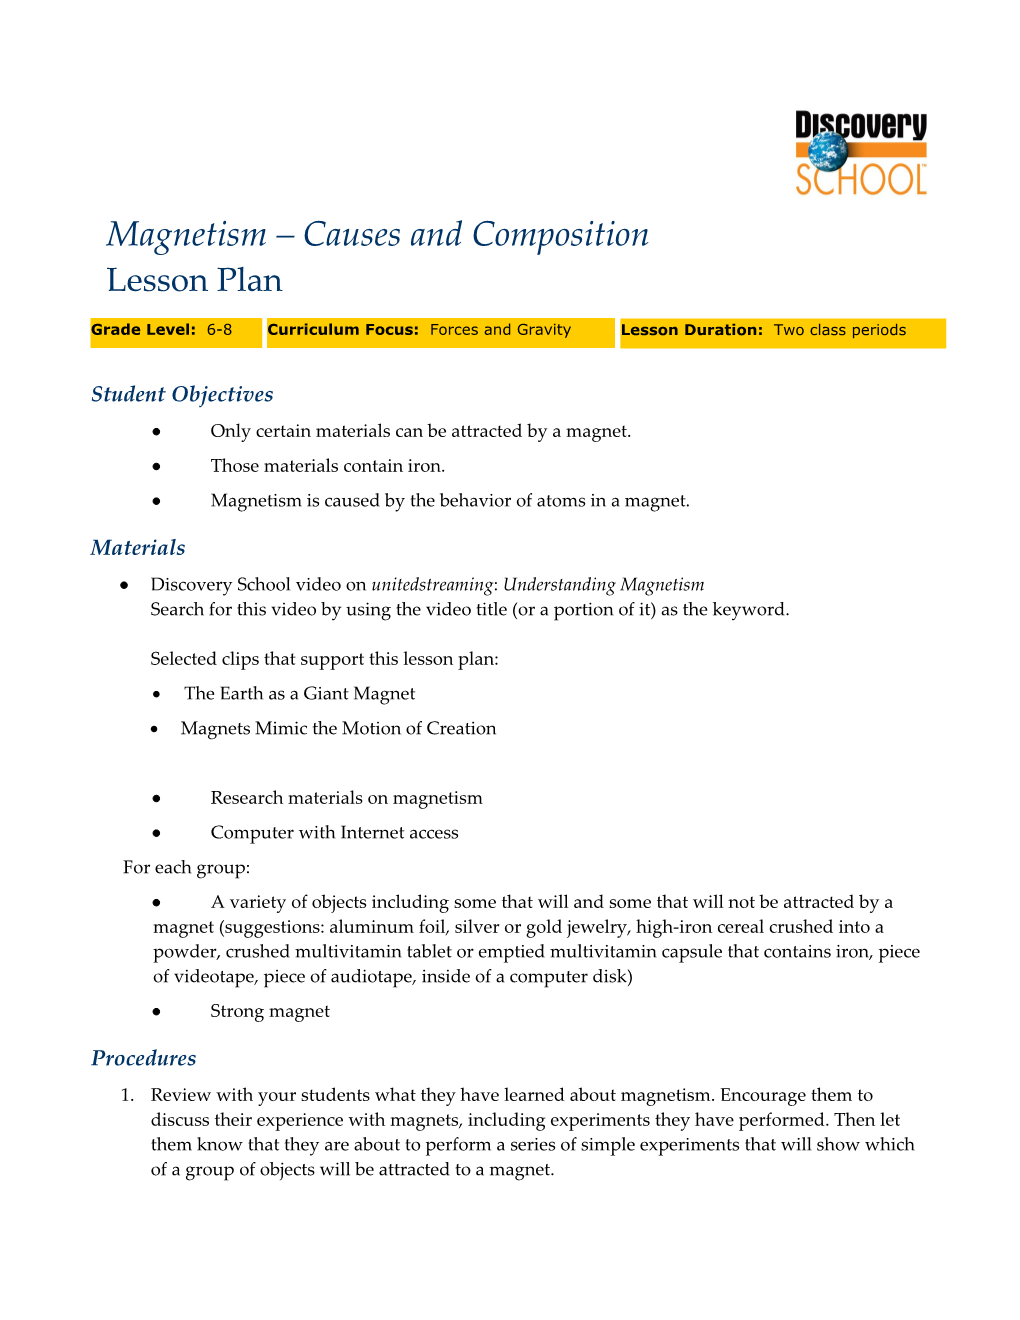 Magnetism Causes and Composition